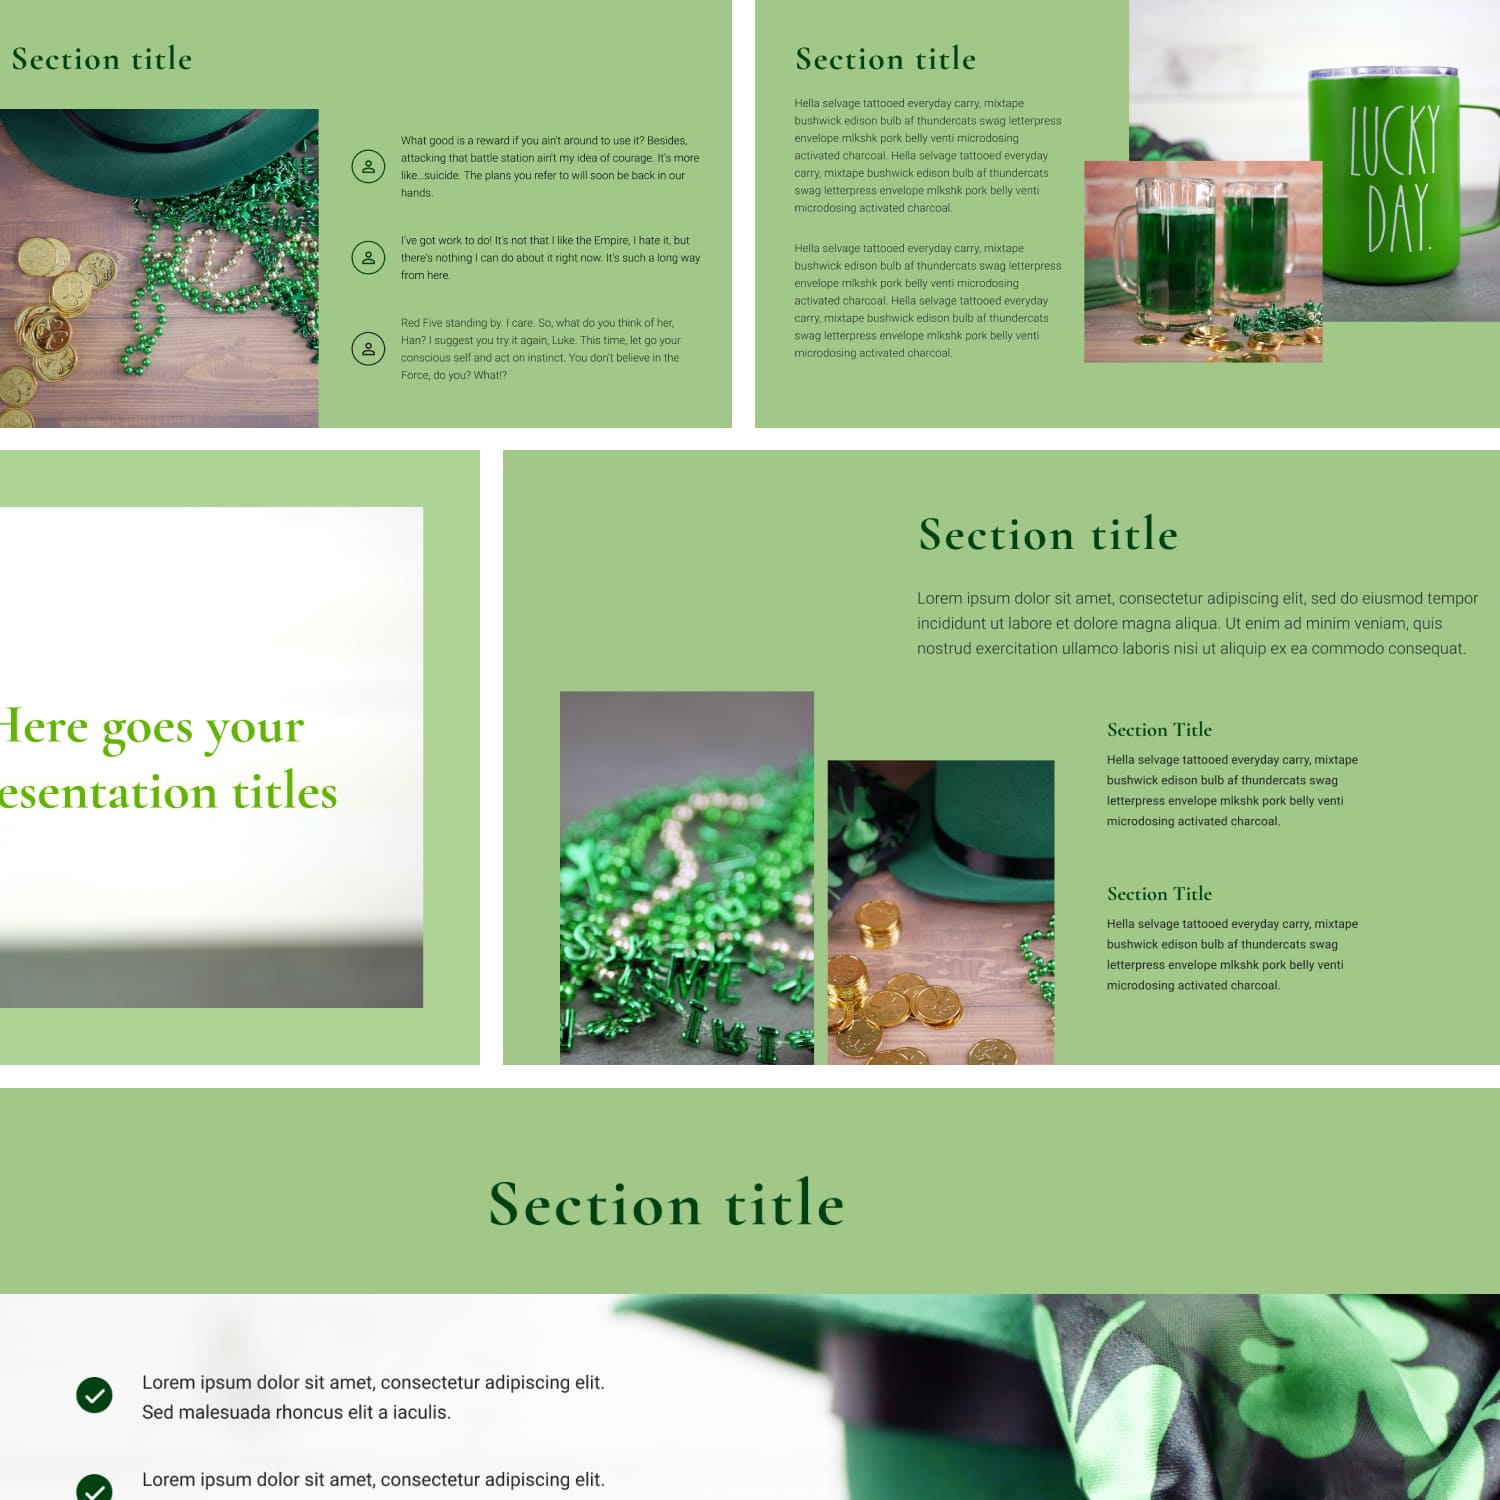 Free St Patricks Day Powerpoint Template 1500x1500 2.